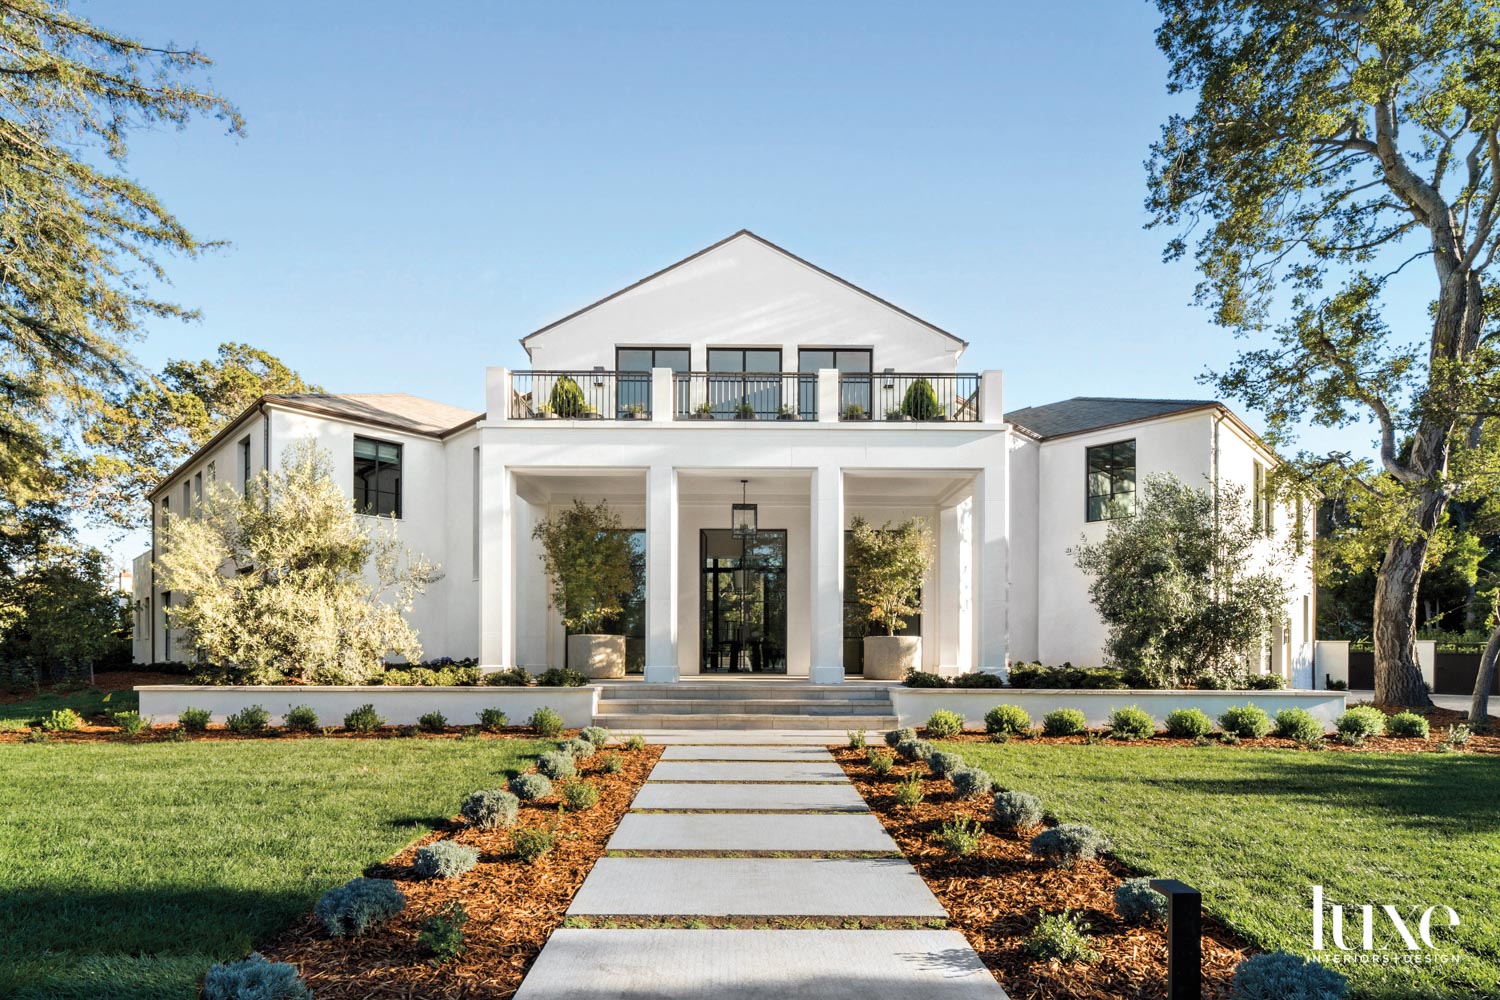 The exterior of this house is done in a classic white